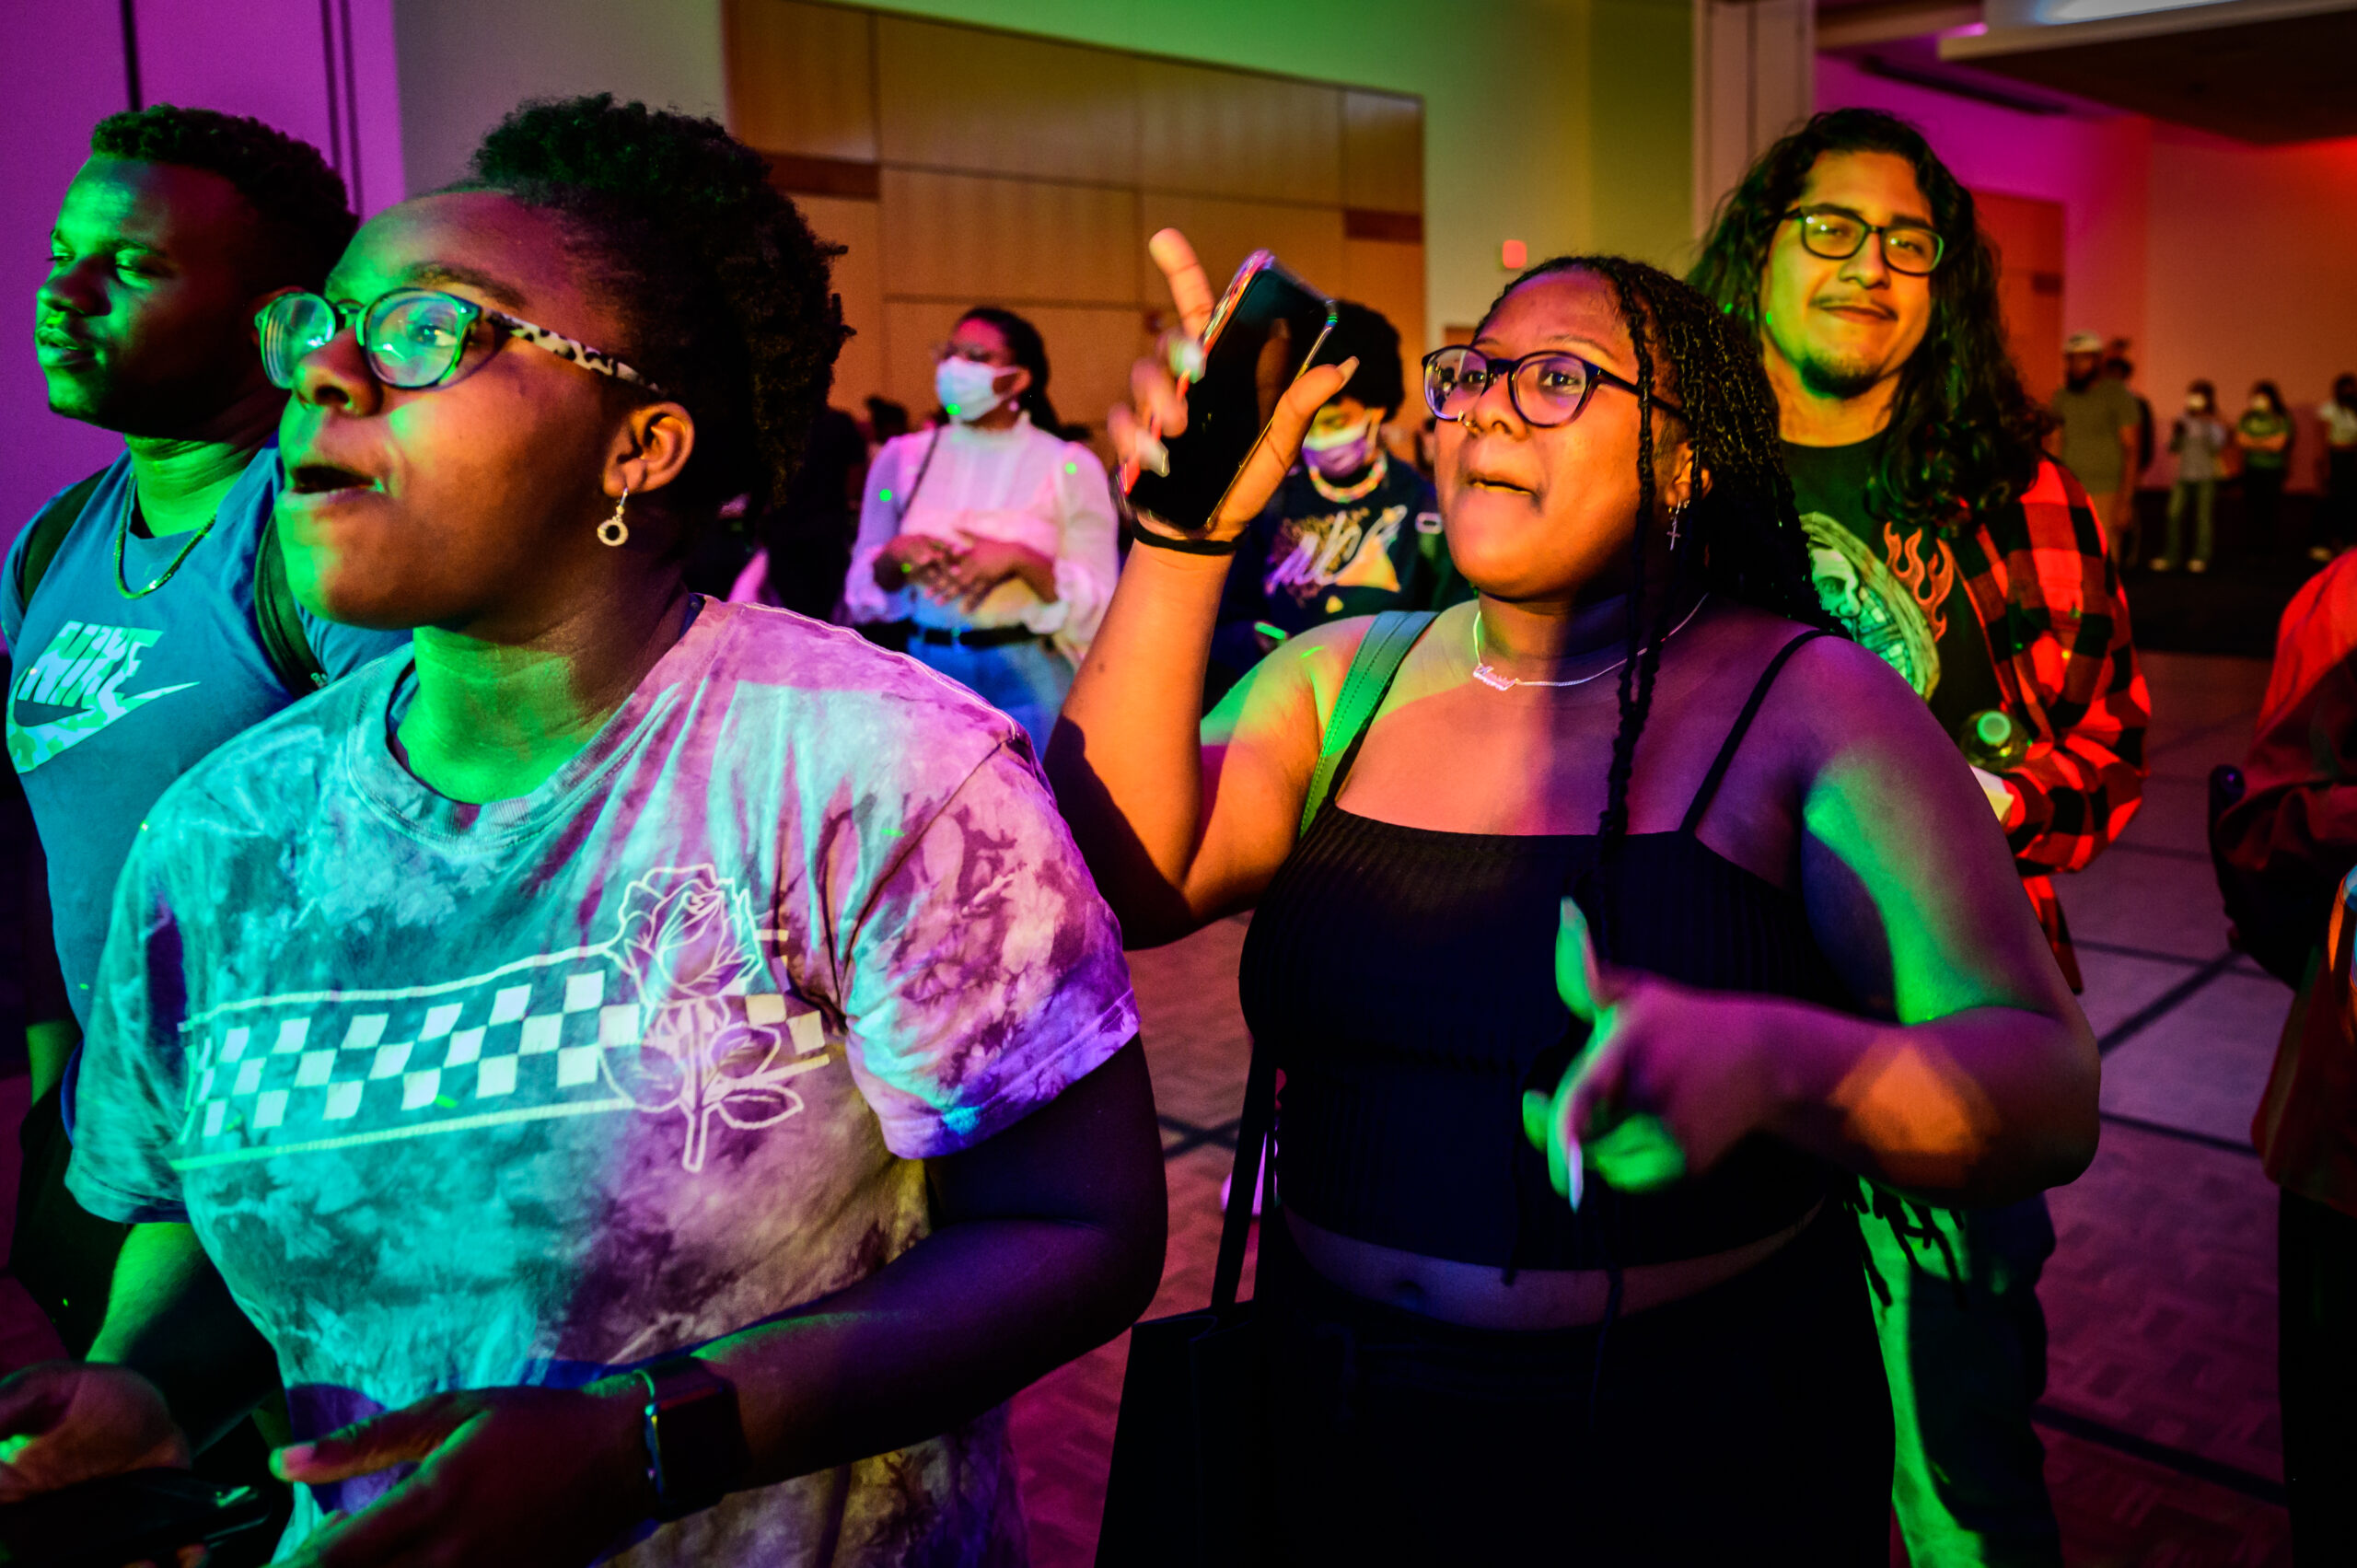 A diverse group of students dancing inside a dark ballroom with colorful lights.